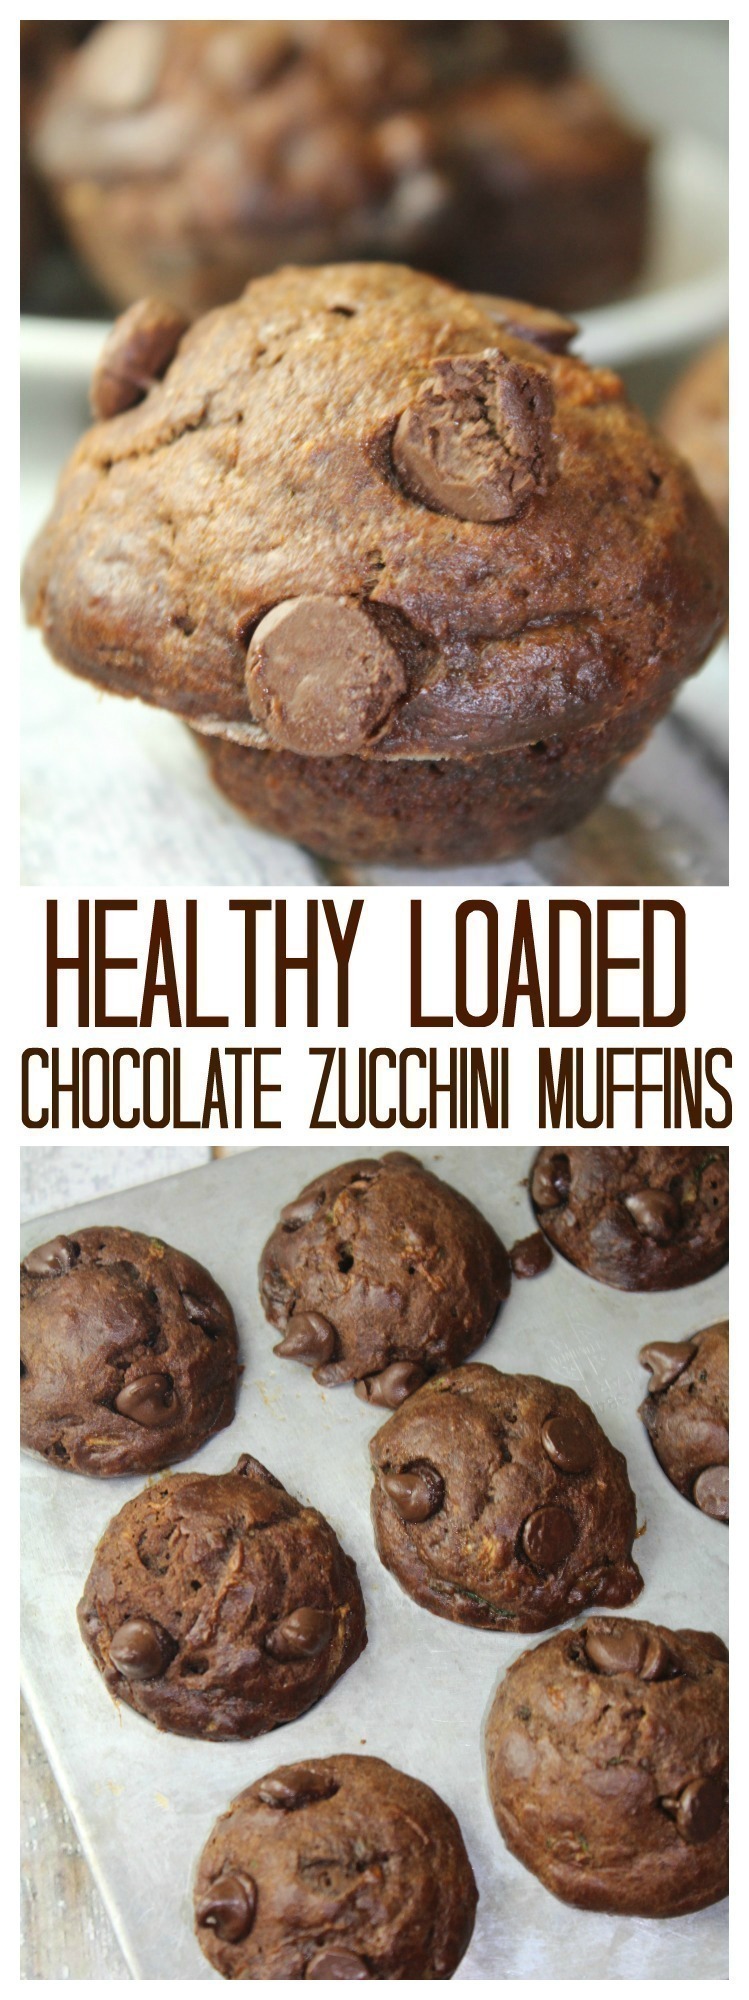 Simple ingredients transformed into beautifully rich, healthy double chocolate zucchini muffins that are perfect for little hands!